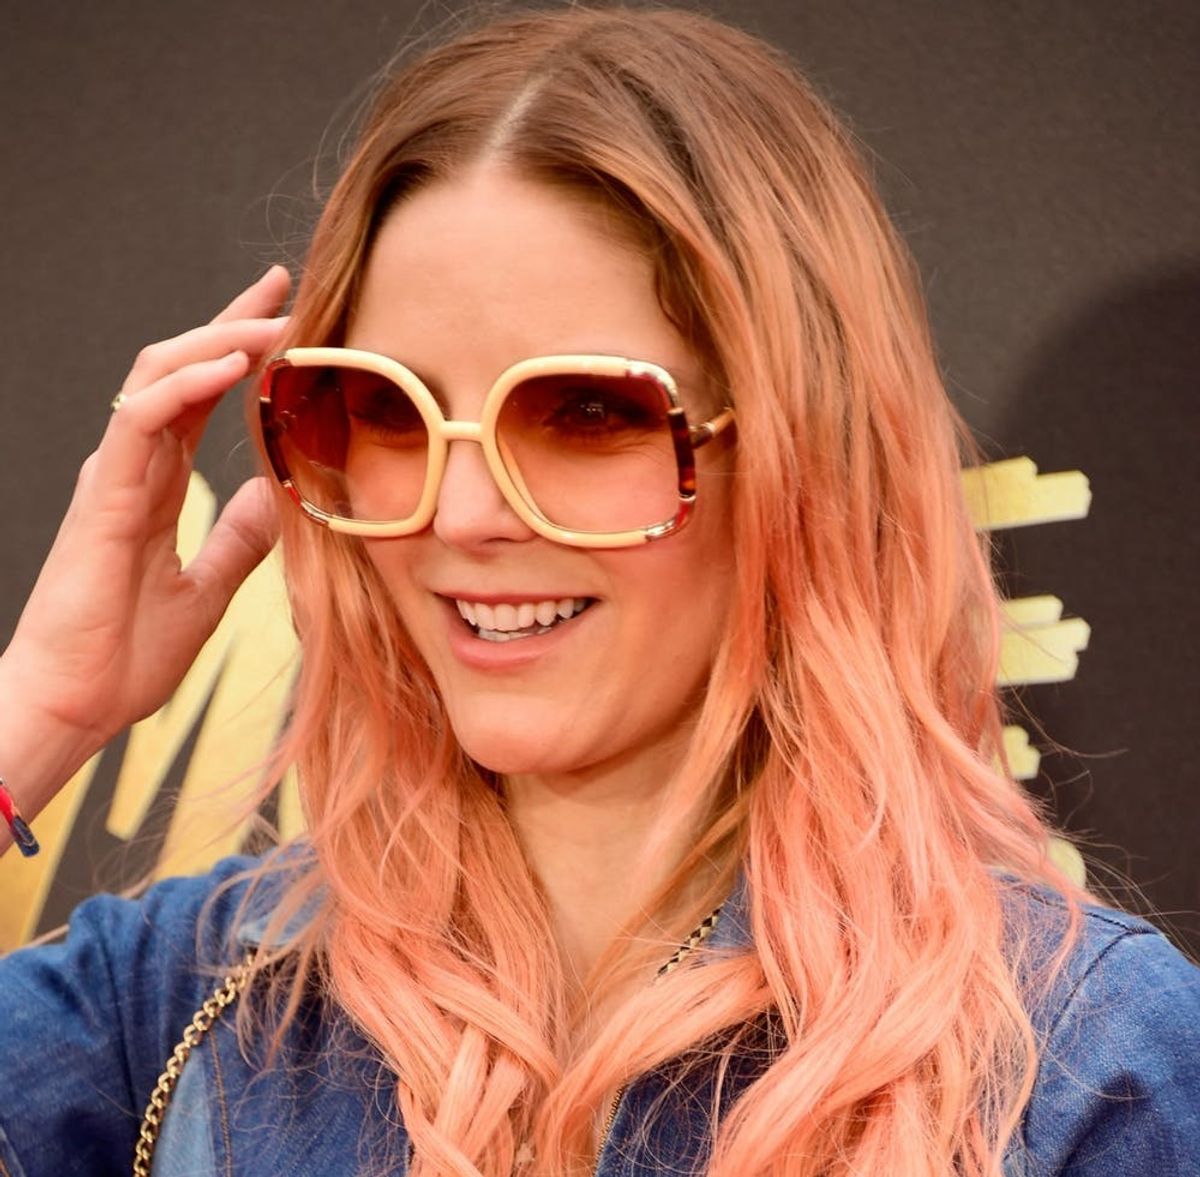 Ombre Roots Is THE Hair Trend That Took Over the 2016 MTV Movie Awards